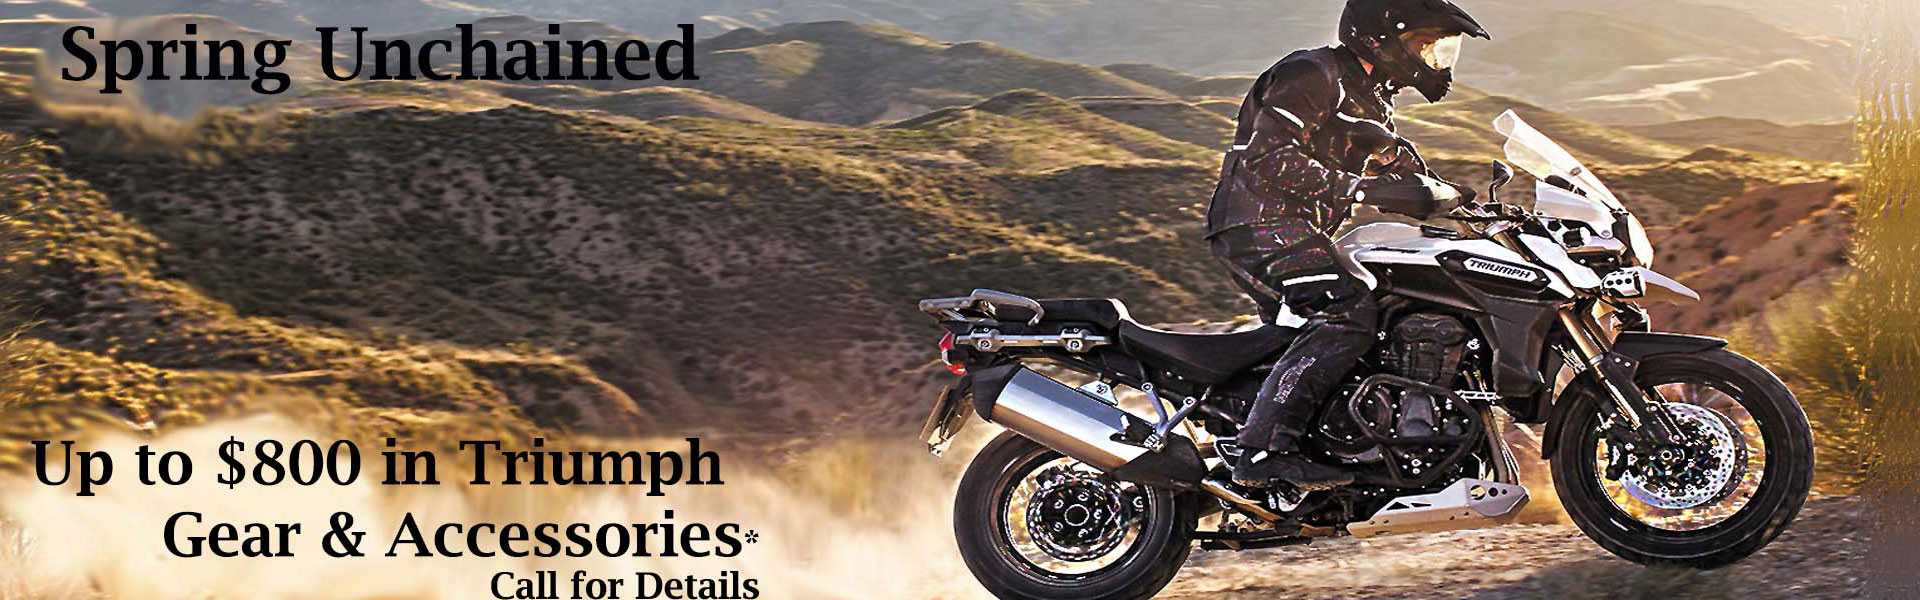 Bmw motorcycle dealers in westchester ny